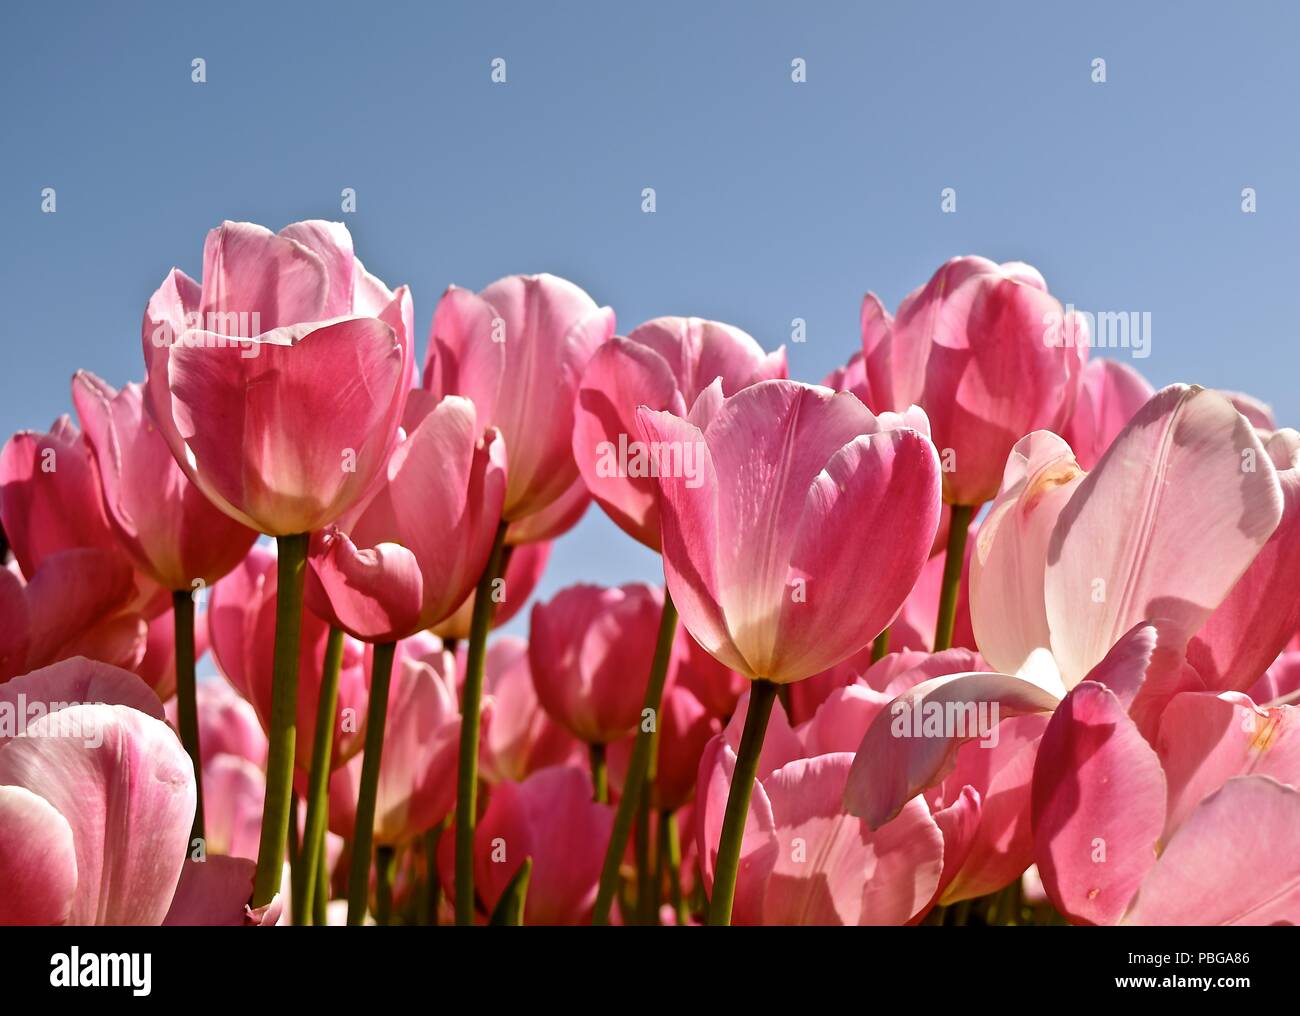 Annual celebration of Spring at the Tulip Farm in Tulip Town, Washington. These brightly colored large showy flowers originated from central Asia. Stock Photo